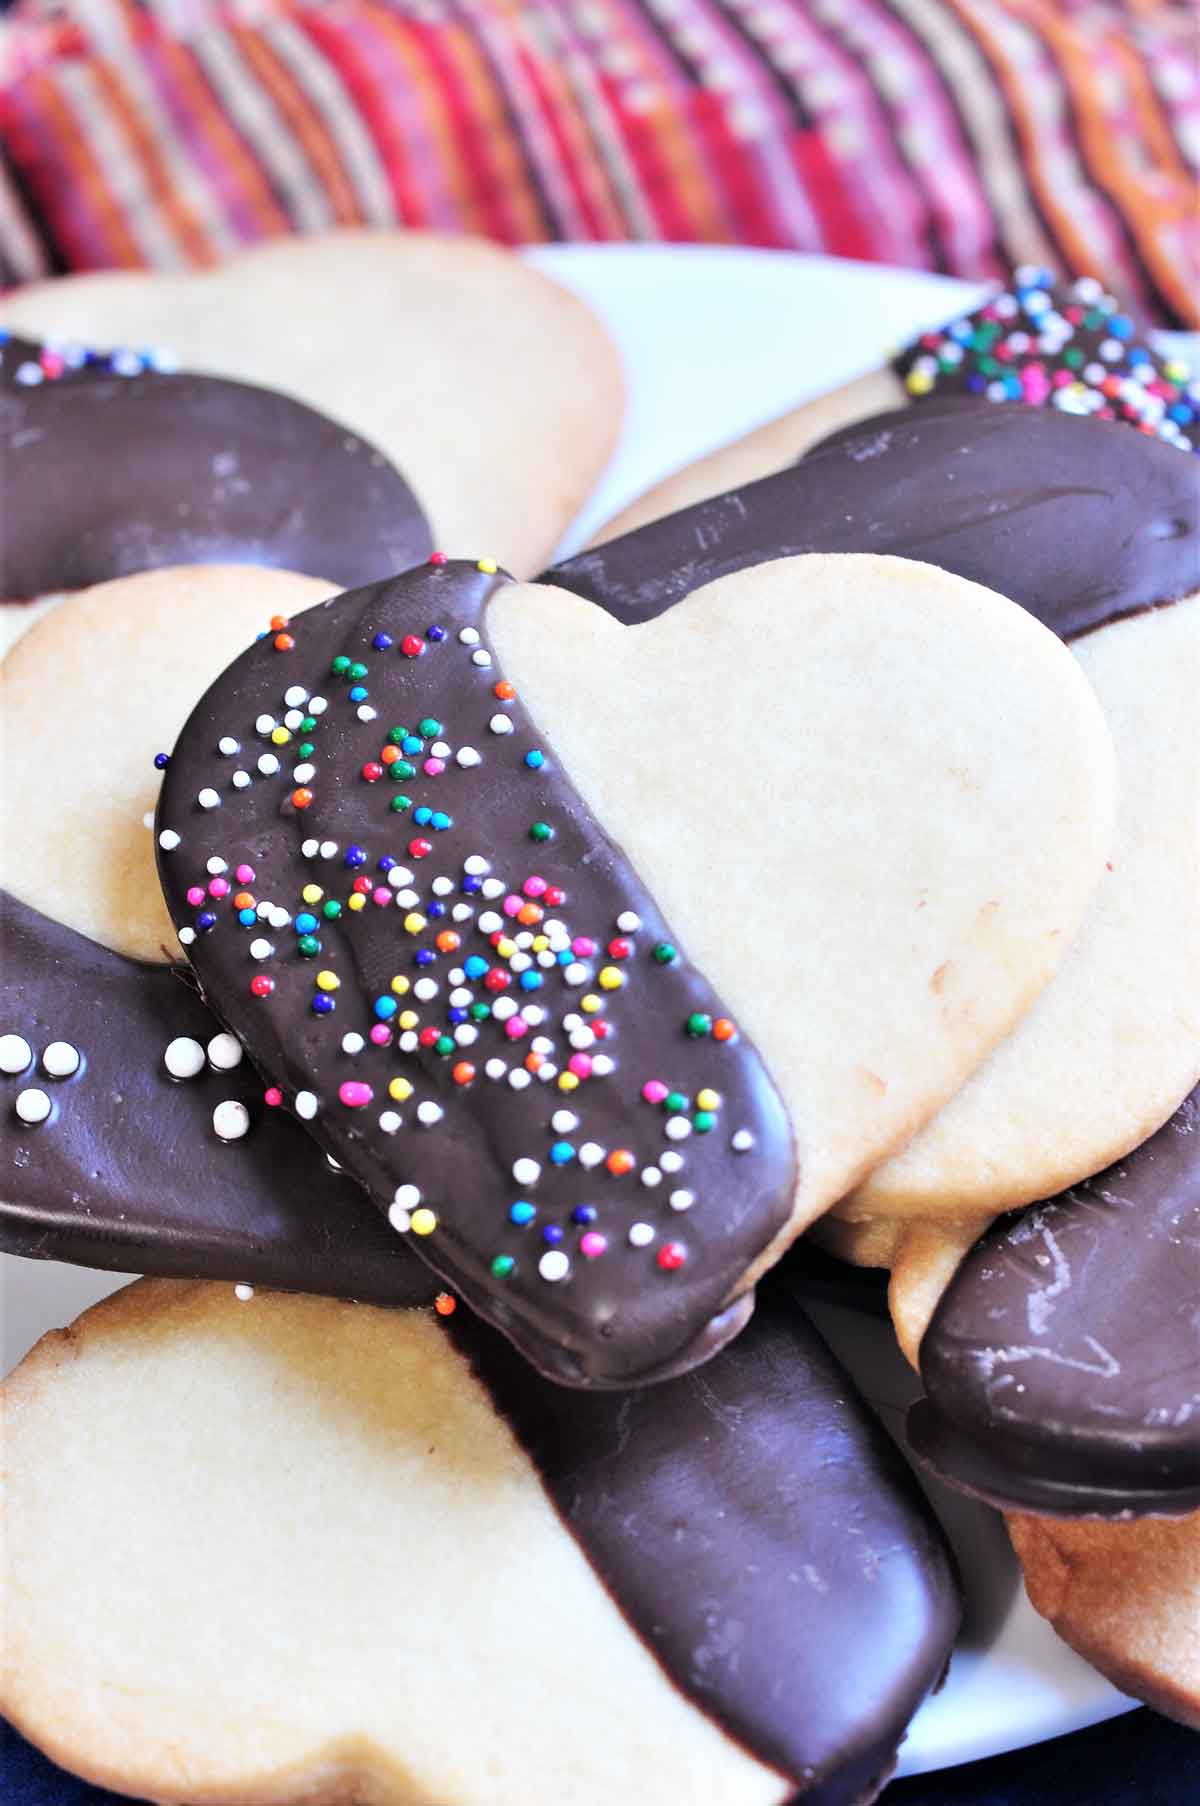 Chocolate dipped heart shaped cookies with sprinkle topping.